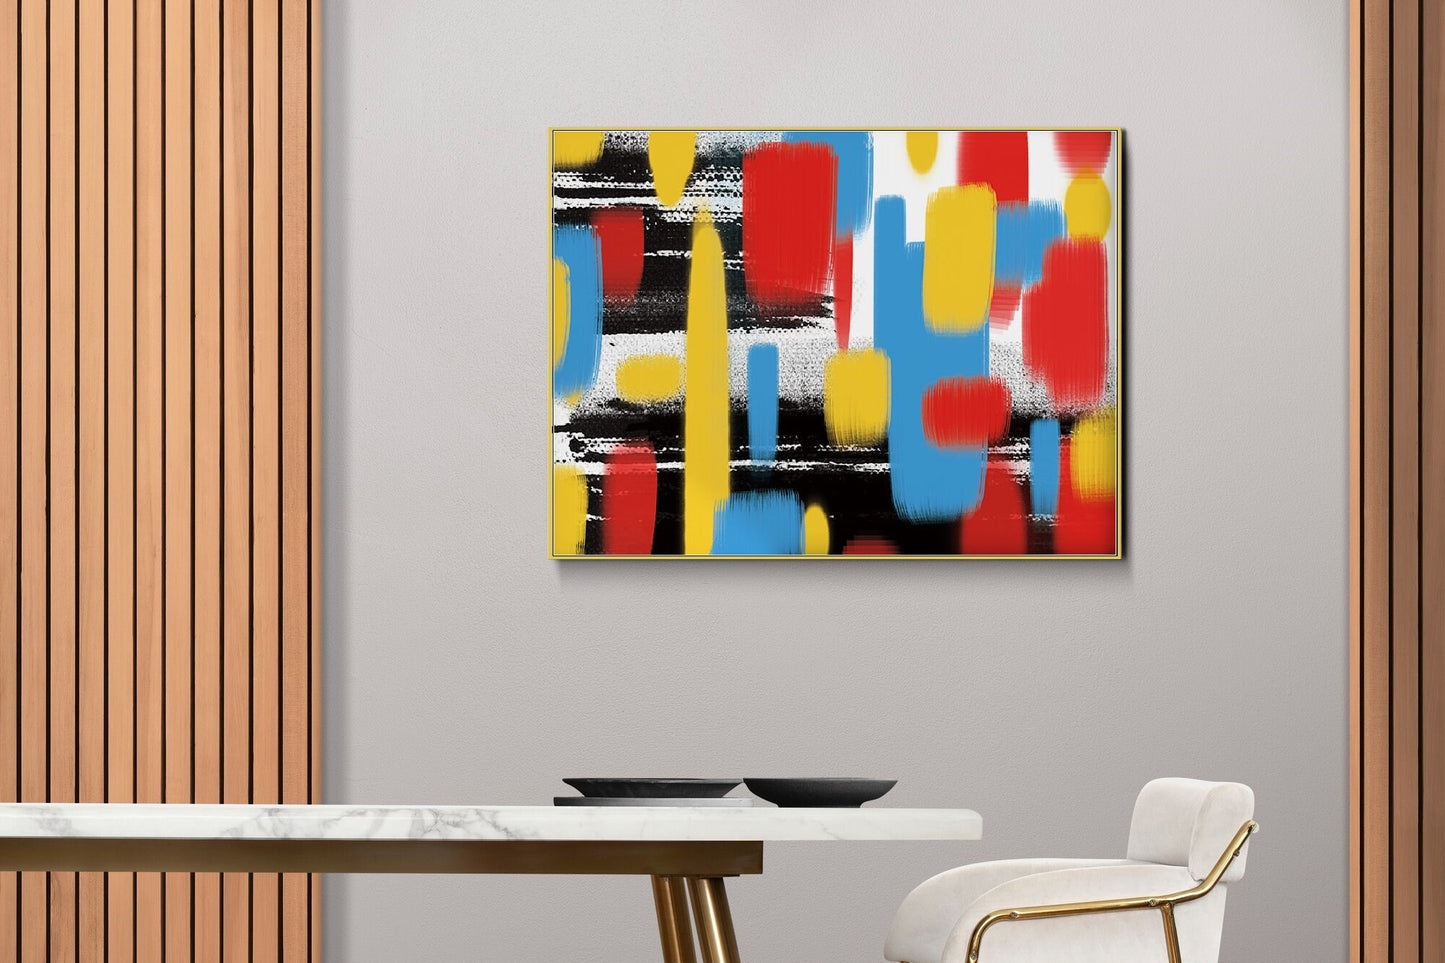 Abstract brush stroke framed canvas wall art, colorful floating frame canvas print, modern multi colored hanging wall decor for living room